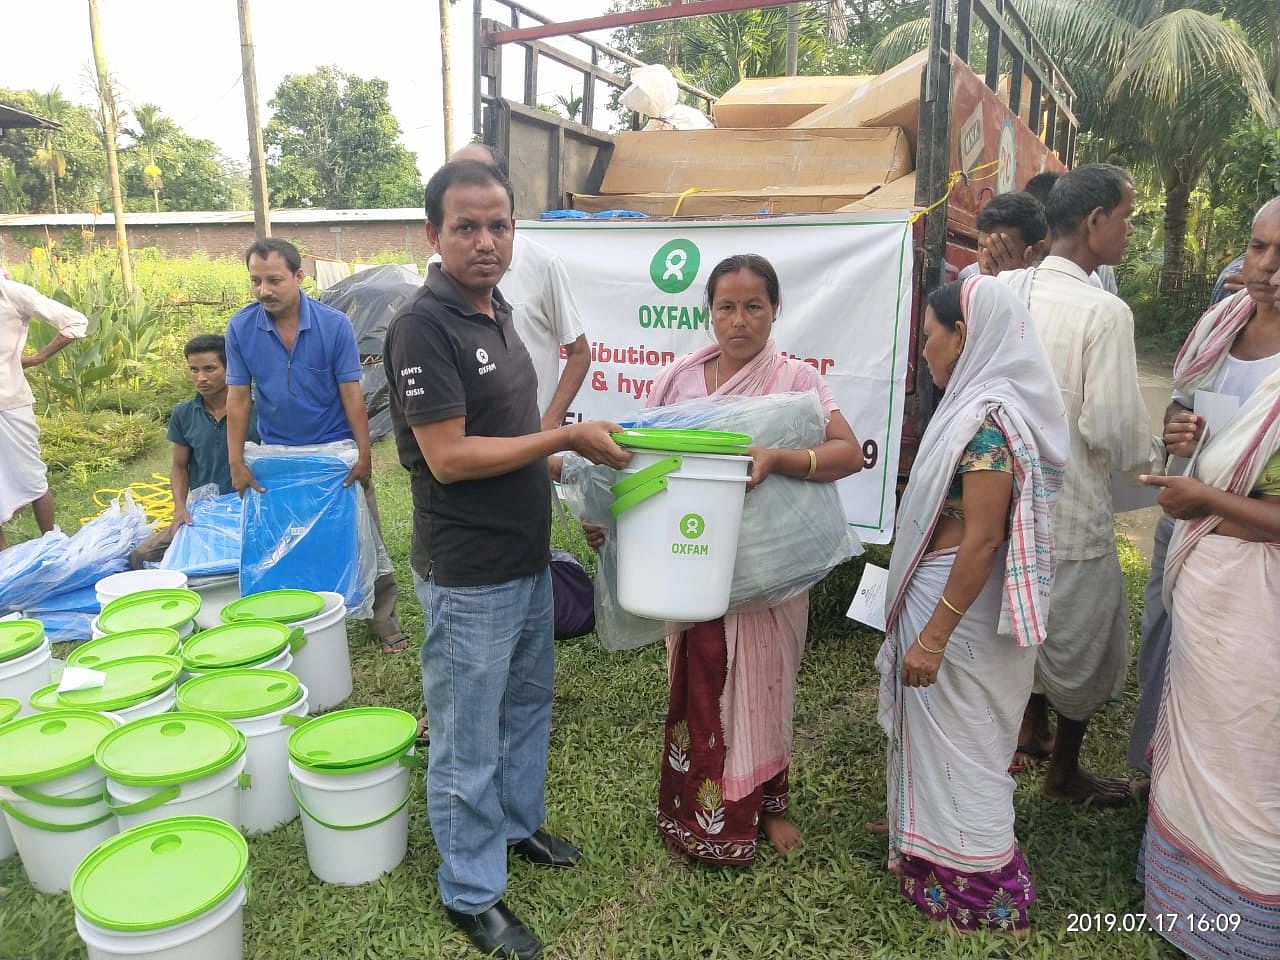 Oxfam India distributing relief materials among flood hit people in Lahorighat area in upper Assam on Wednesday. DH photo